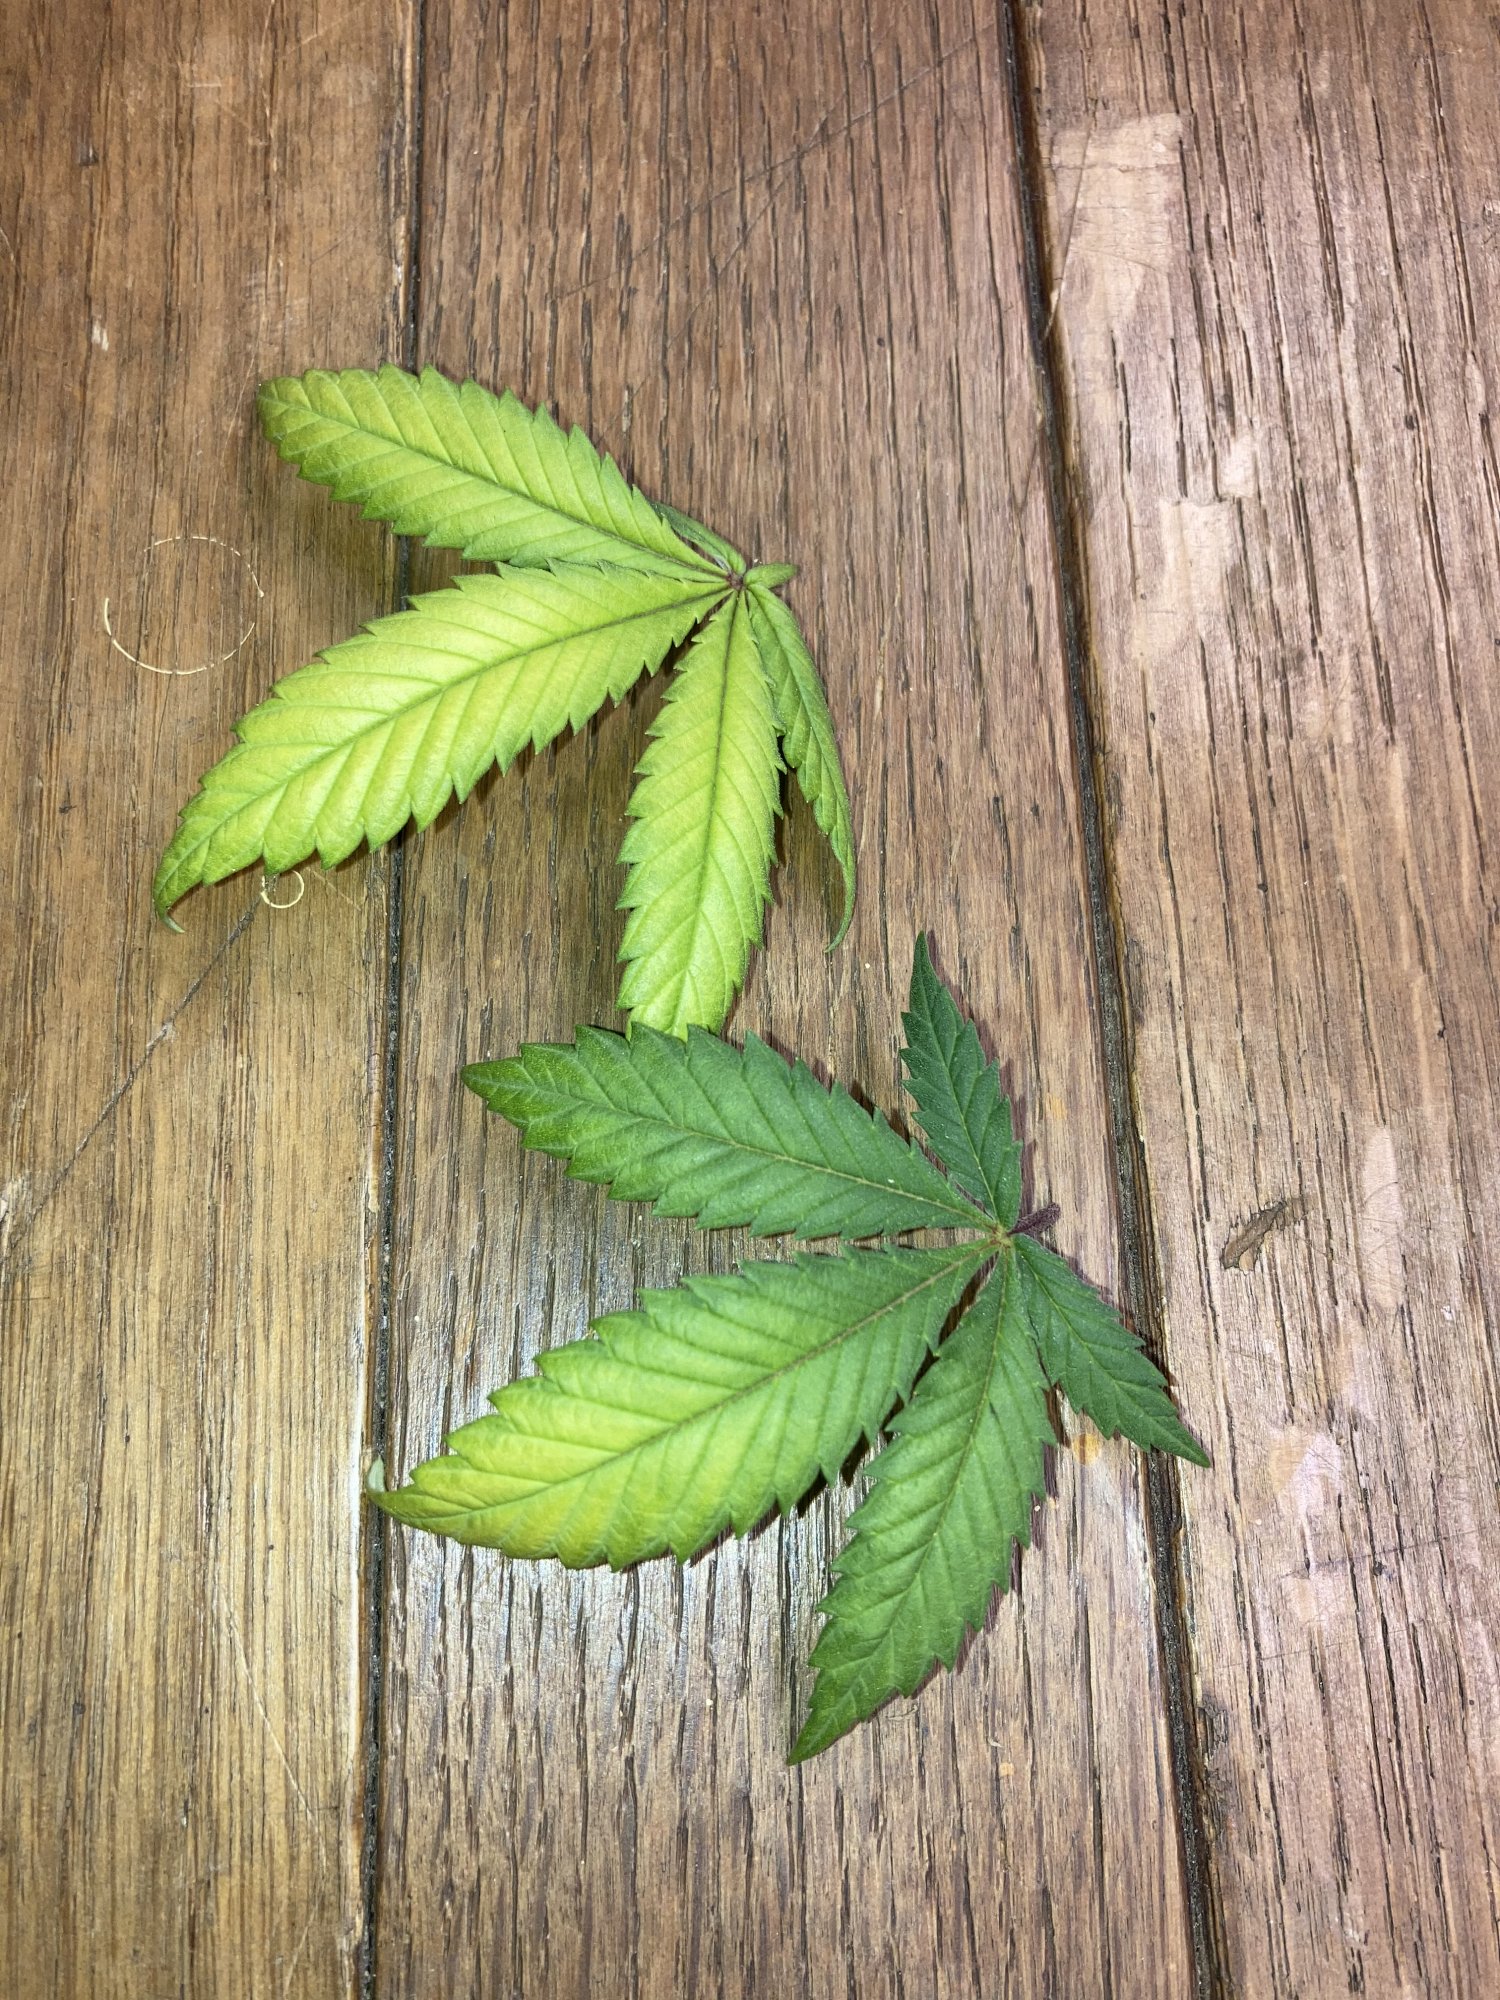 Help me pinpoint which deficiency problem 3